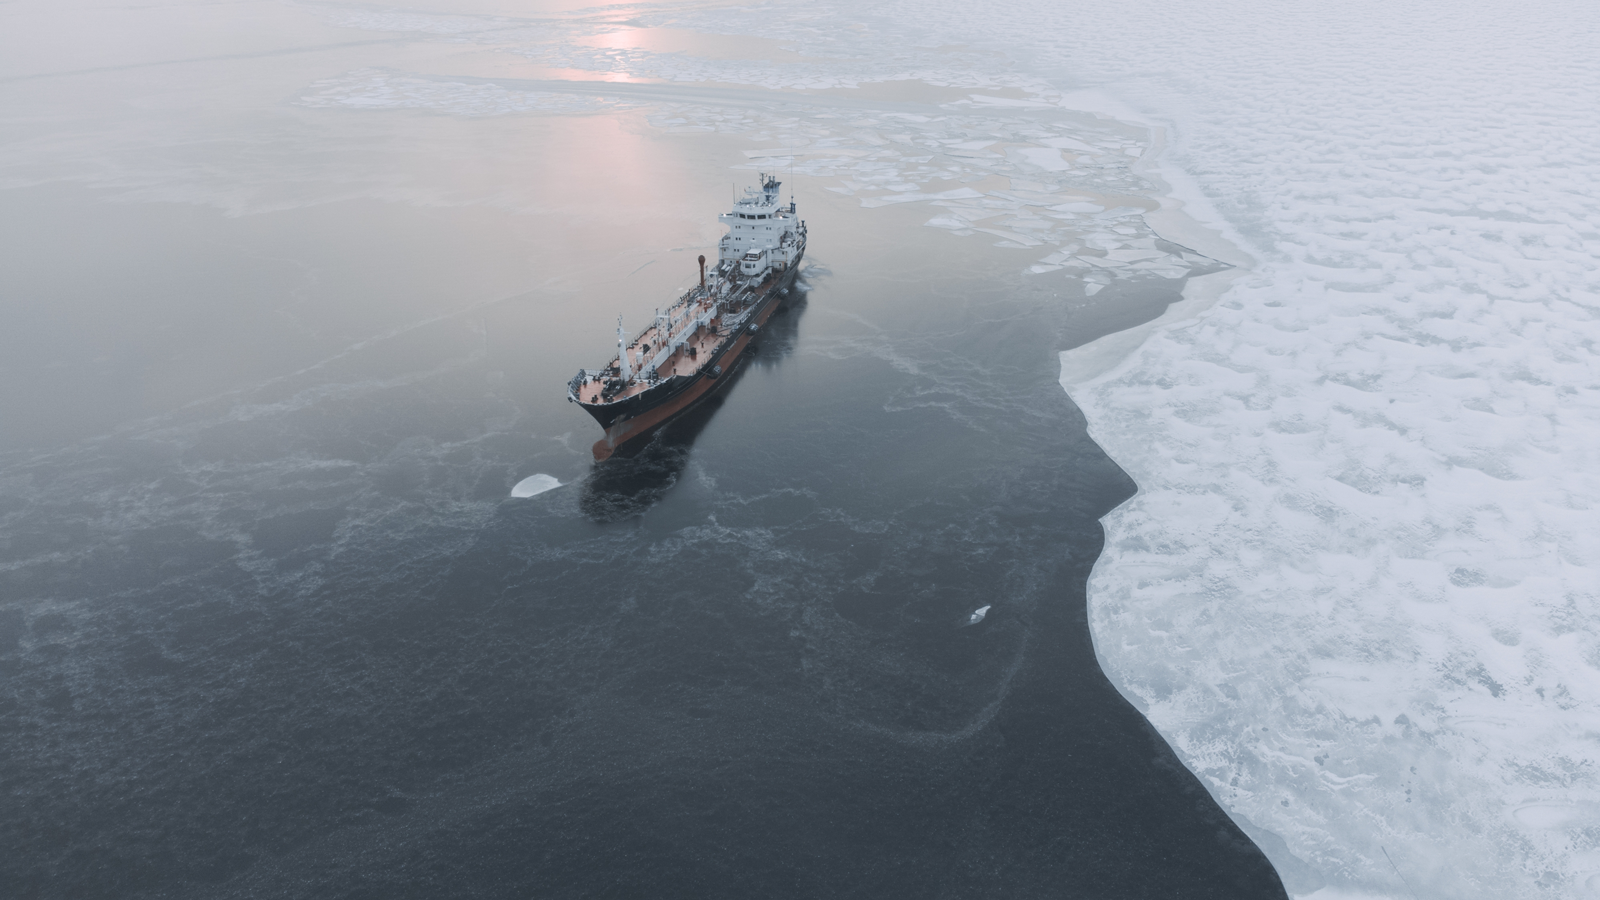 Vessels in Arctic waters now banned from using and carrying ‘dirty’ HFO